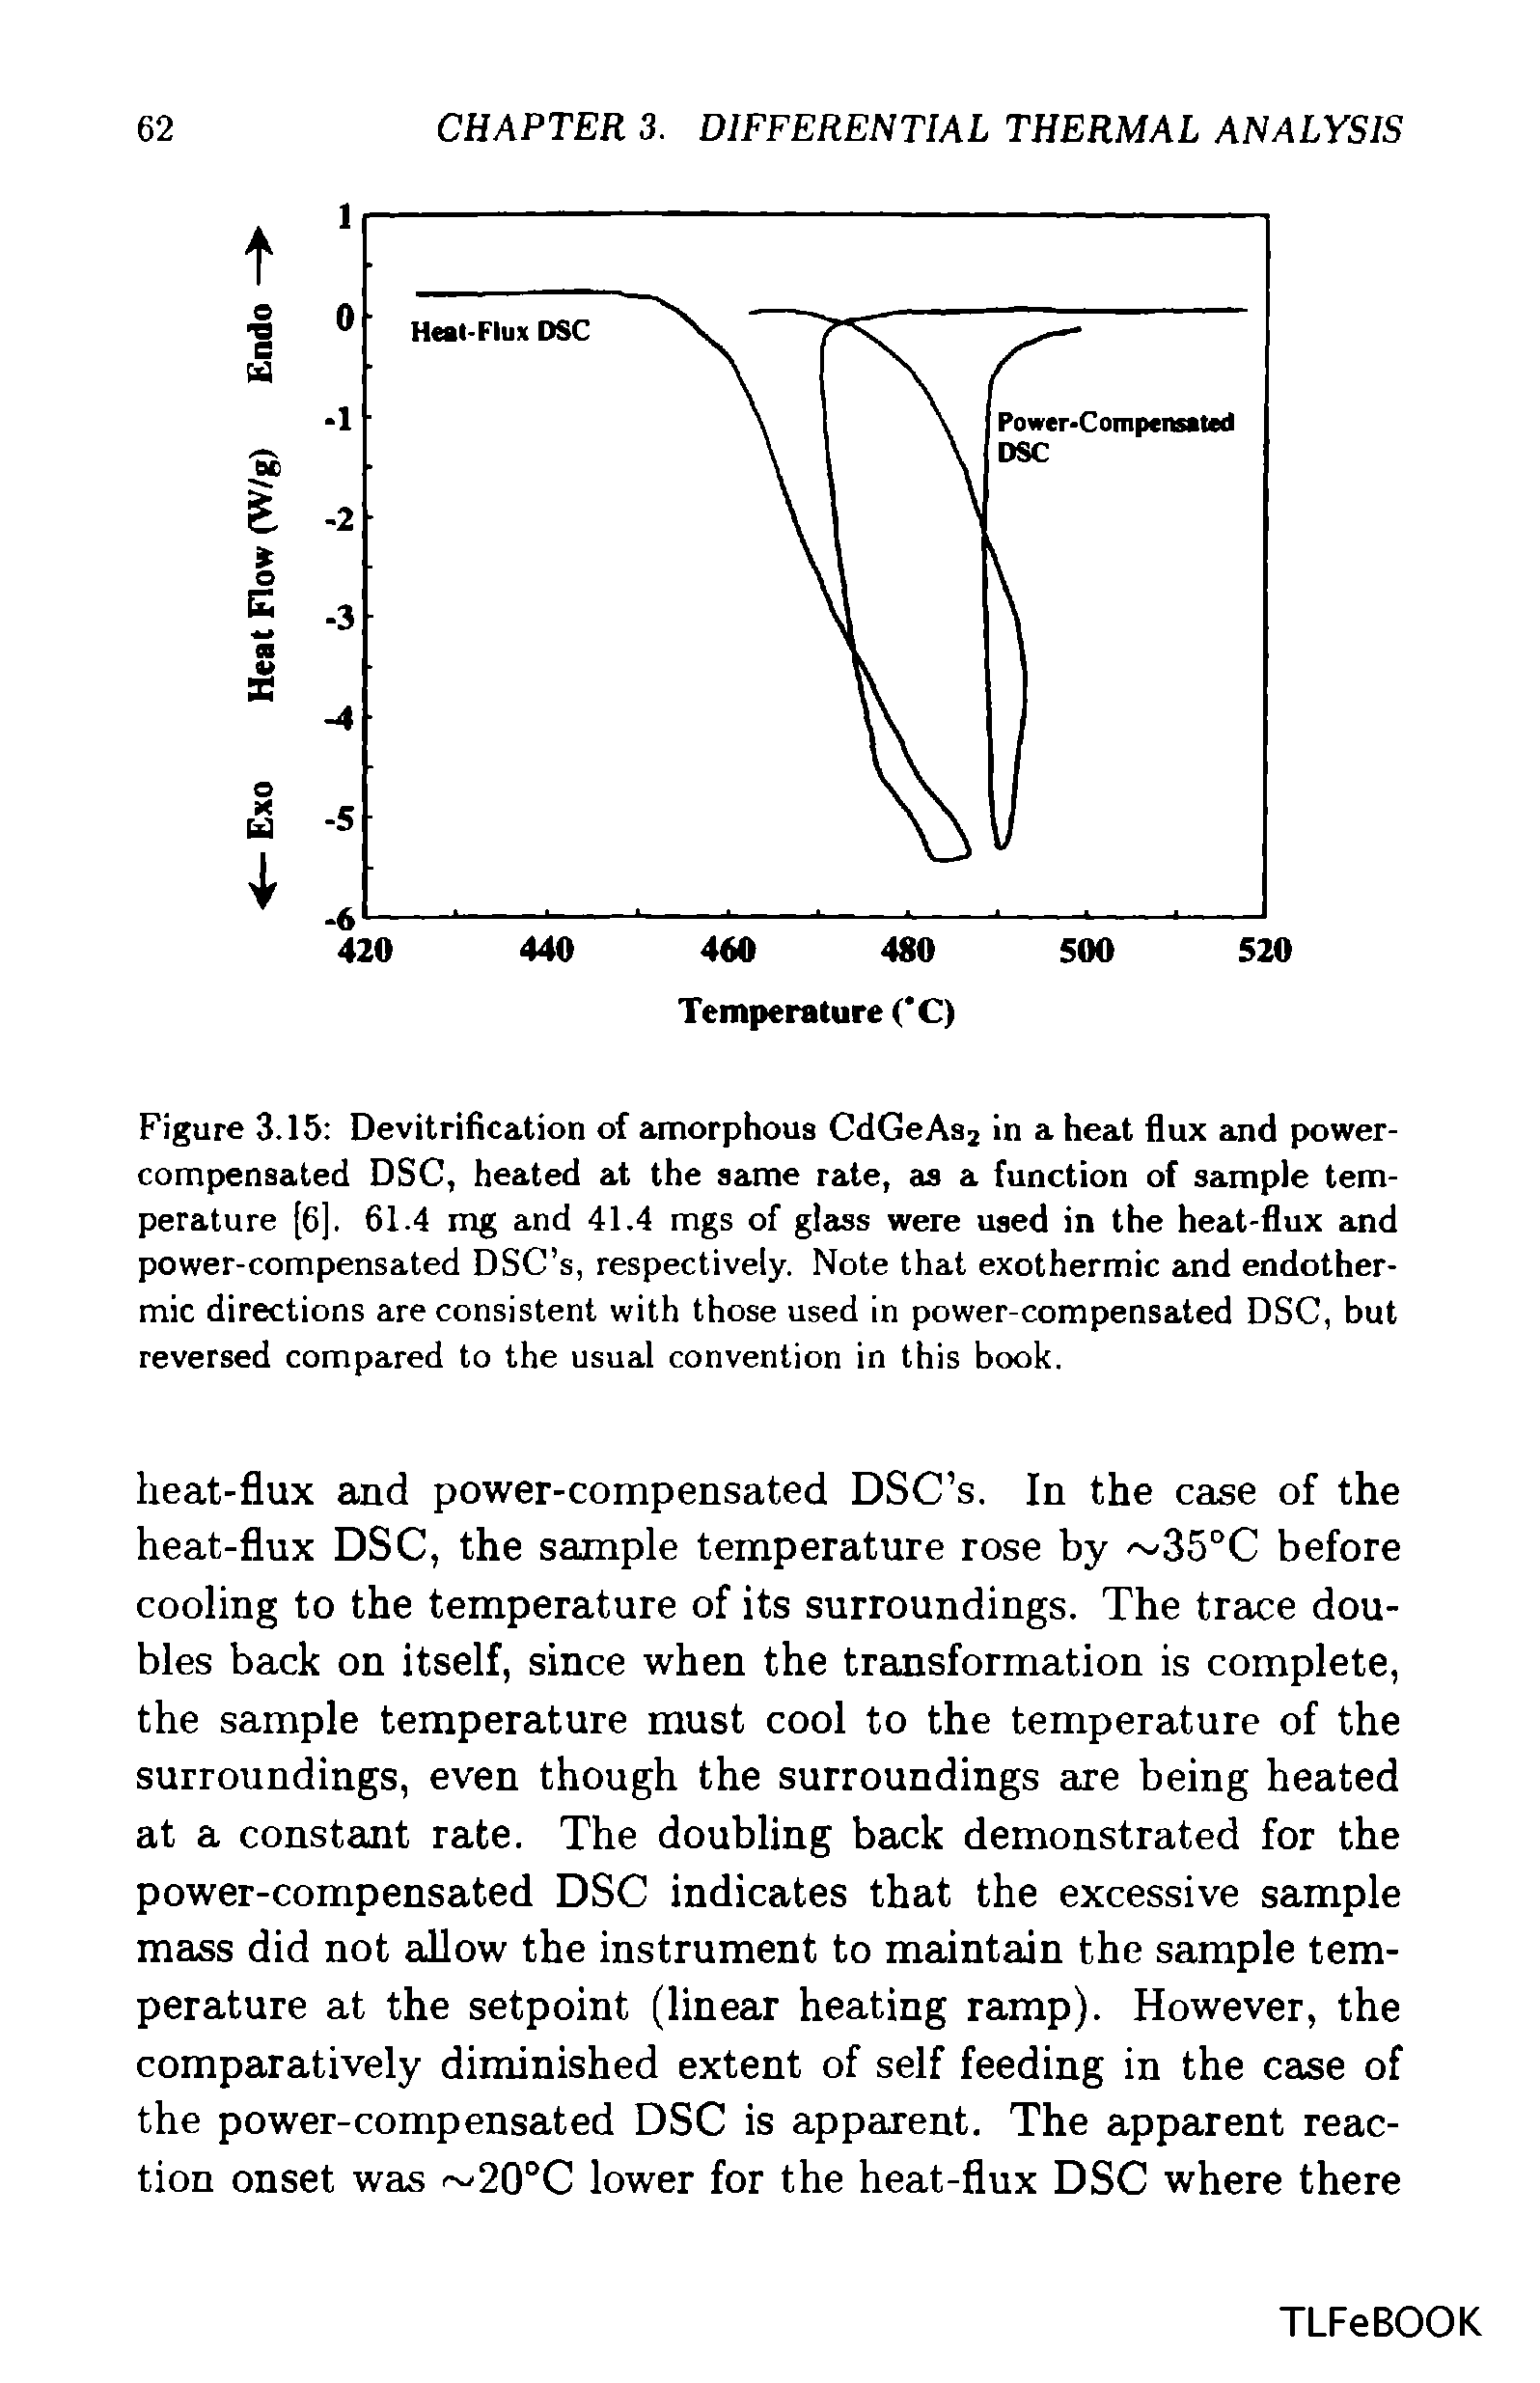 Figure 3.15 Devitrification of amorphous CdGeAs2 in a heat flux and power-compensated DSC, heated at the same rate, as a function of sample temperature [6]. 61.4 mg and 41.4 mgs of glass were used in the heat-flux and power-compensated DSC s, respectively. Note that exothermic and endothermic directions are consistent with those used in power-compensated DSC, but reversed compared to the usual convention in this book.